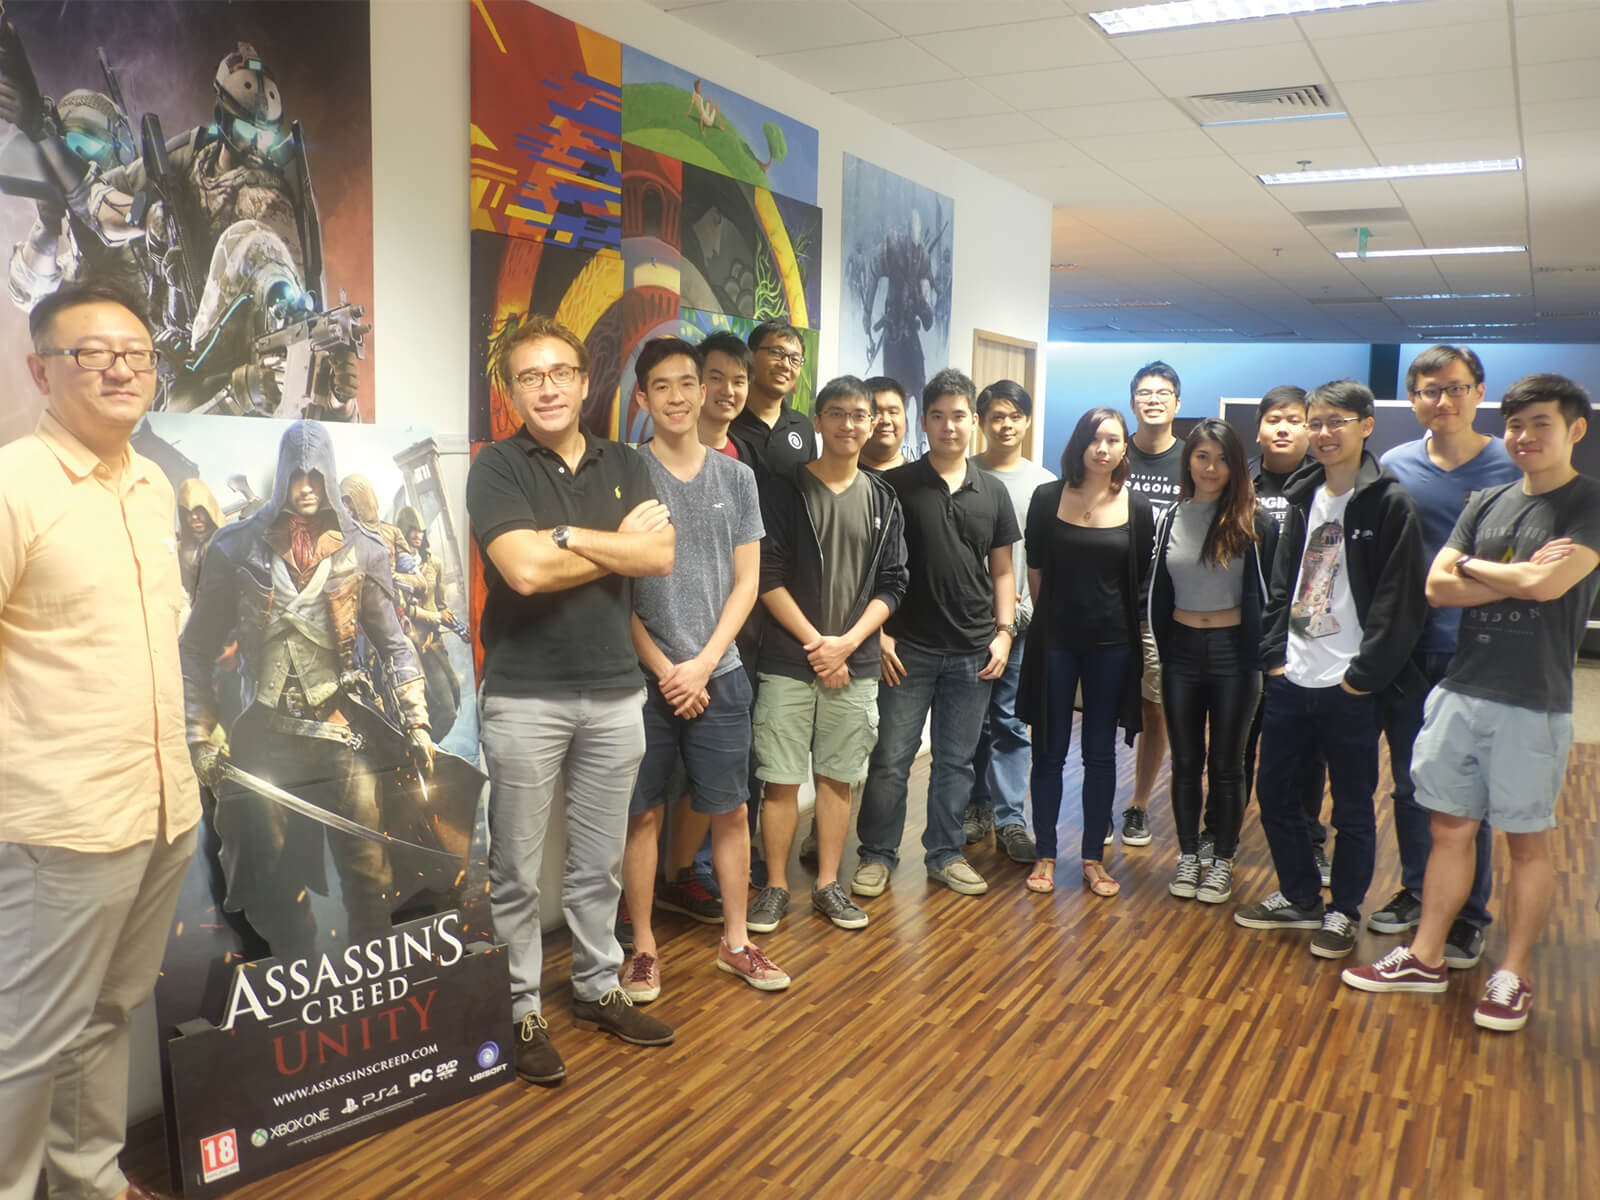 DigiPen students stand in lobby of Ubisoft Singapore office next to a cardboard cutout of an Assassin's Unity character